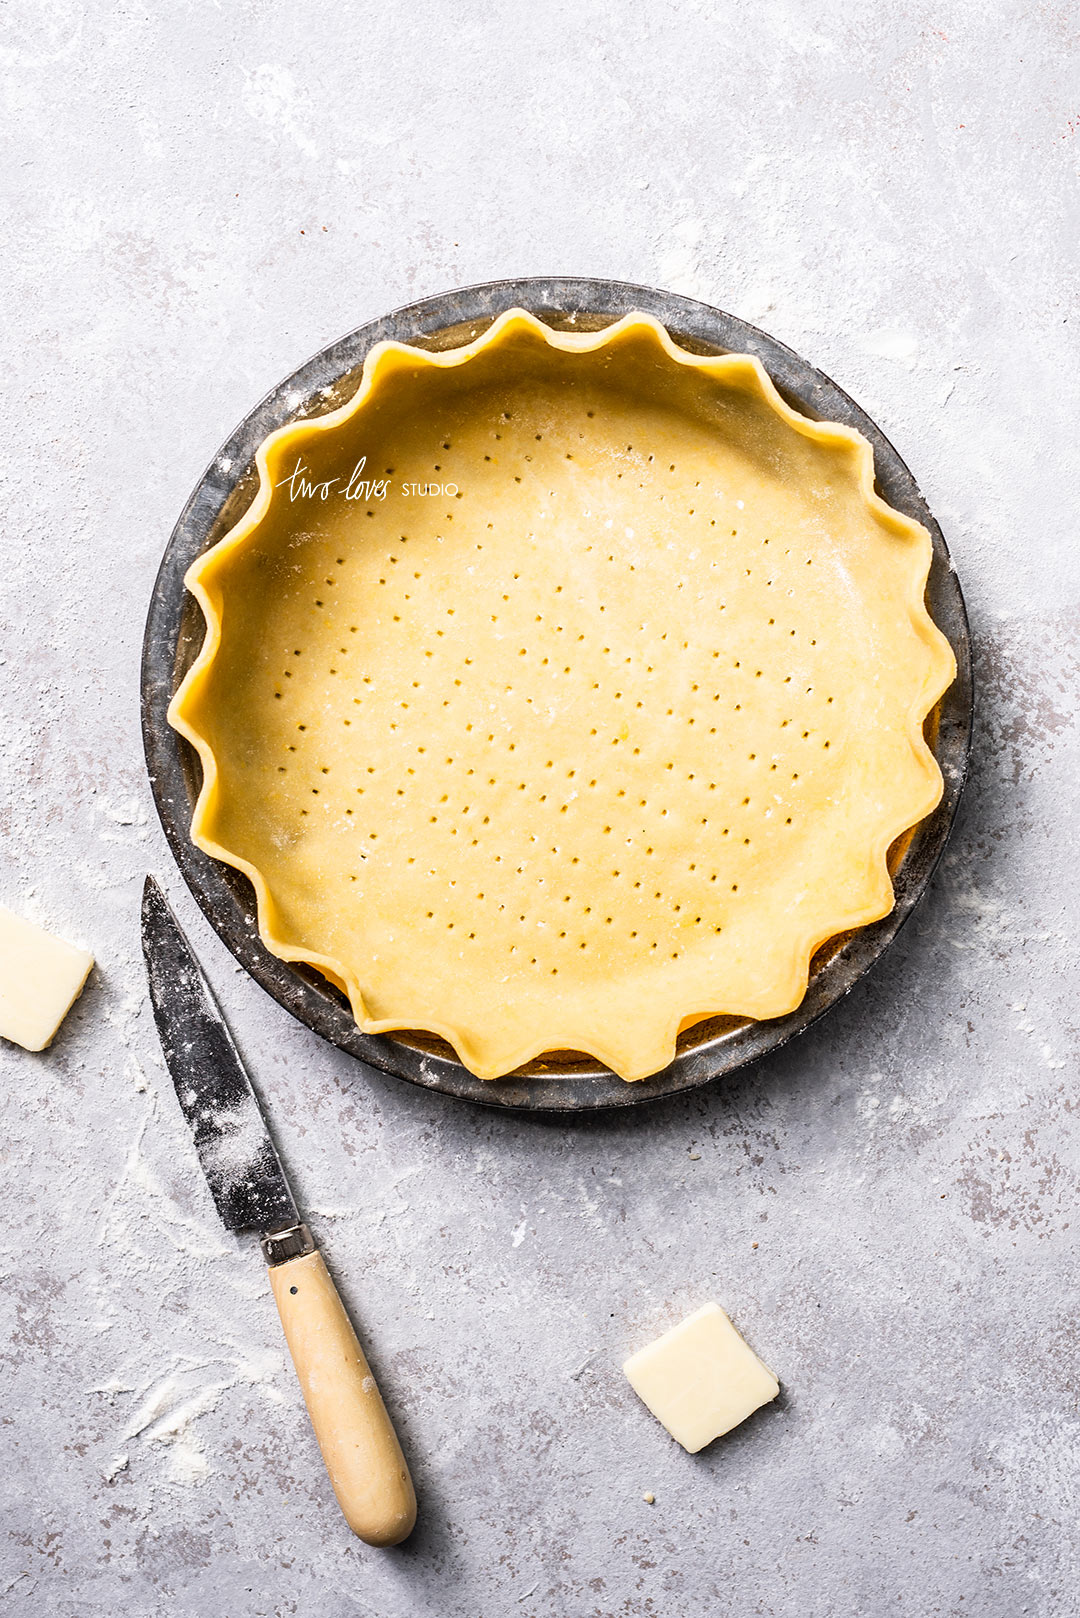 Create photo-worthy pie crust with this easy & beautiful pastry recipe. Get ready to shoot beautiful pies!